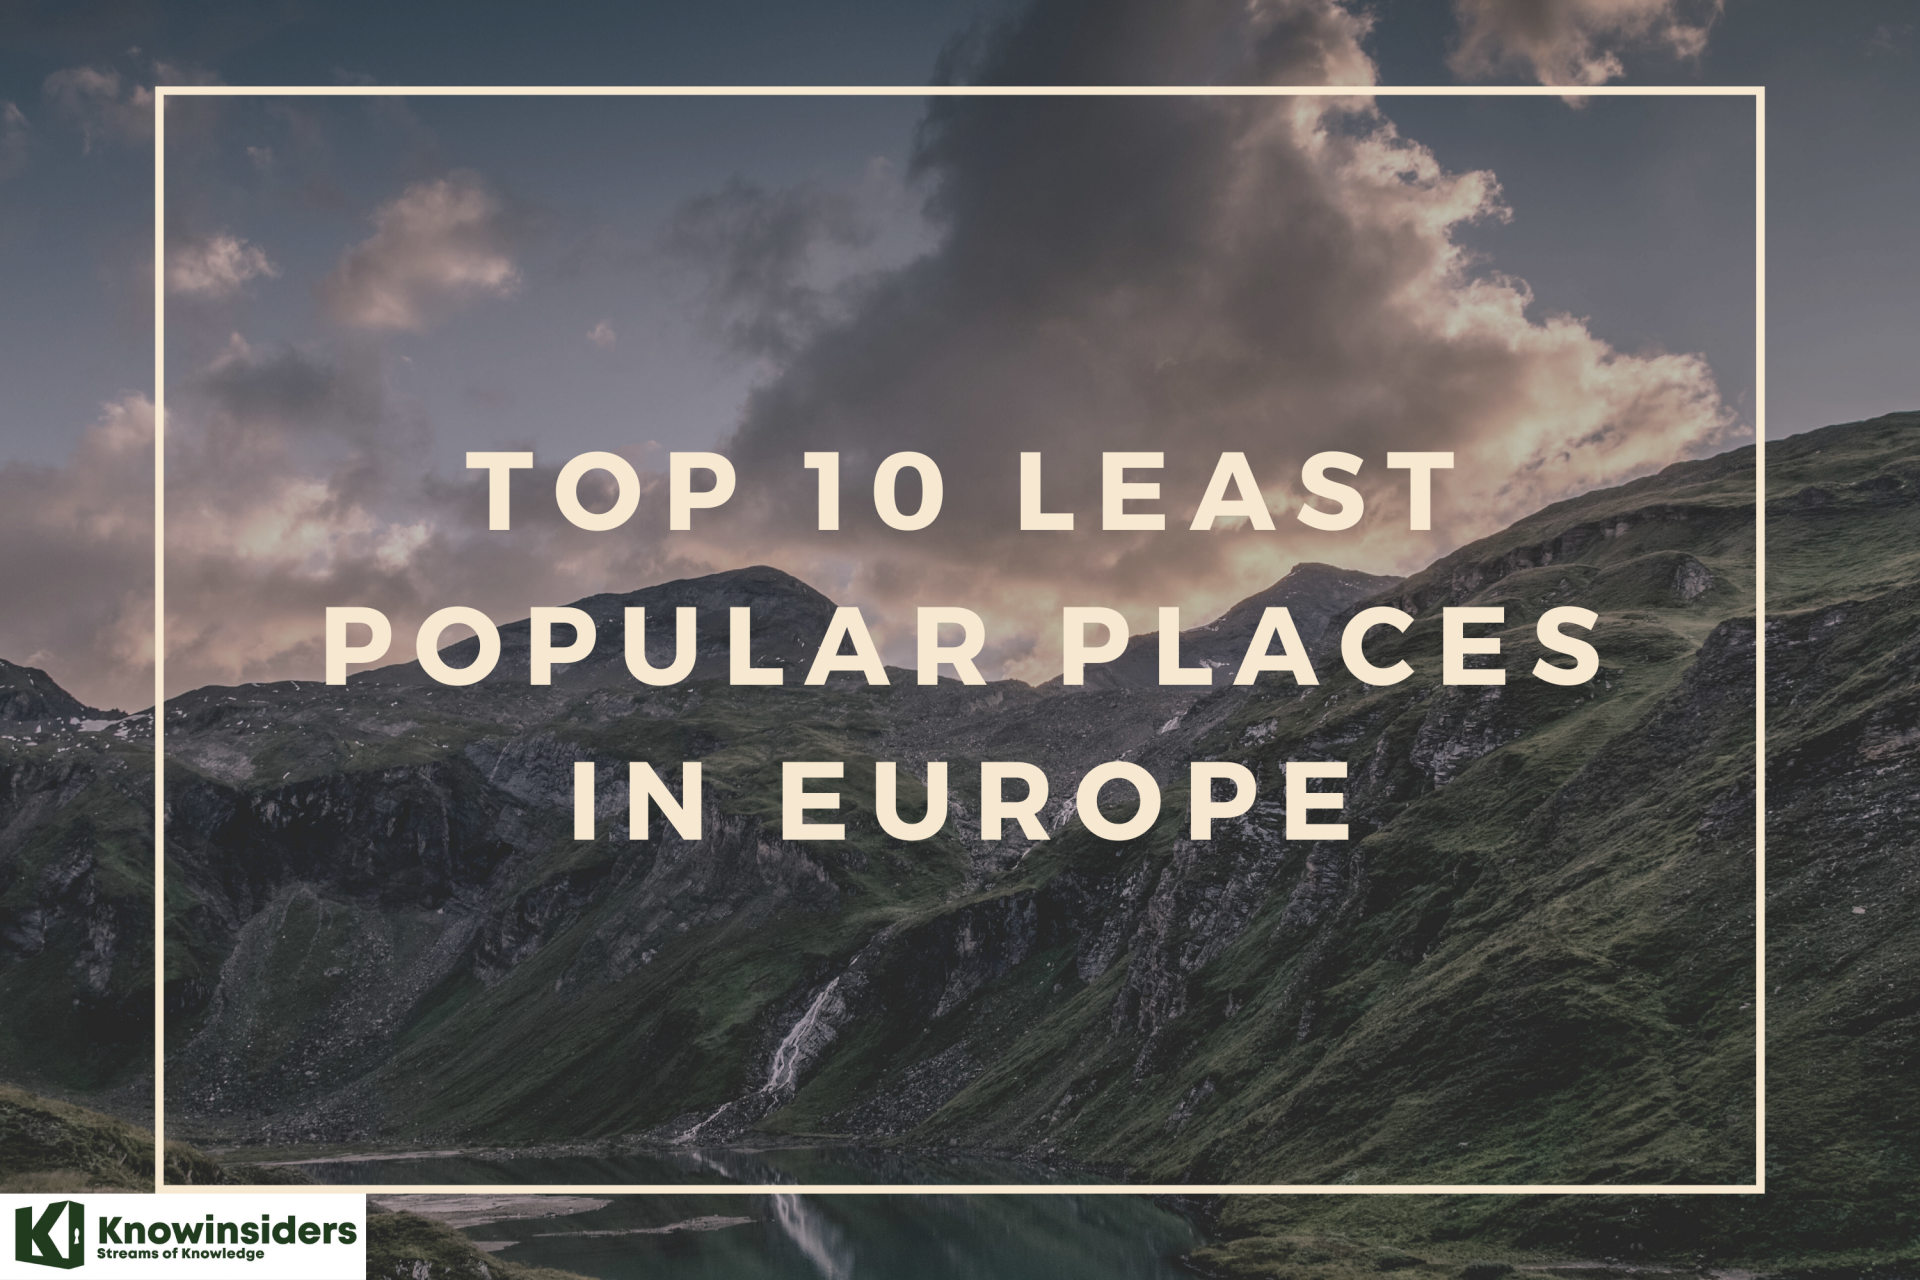 Top 10 Least-Visited Places in Europe Makes You Surprised